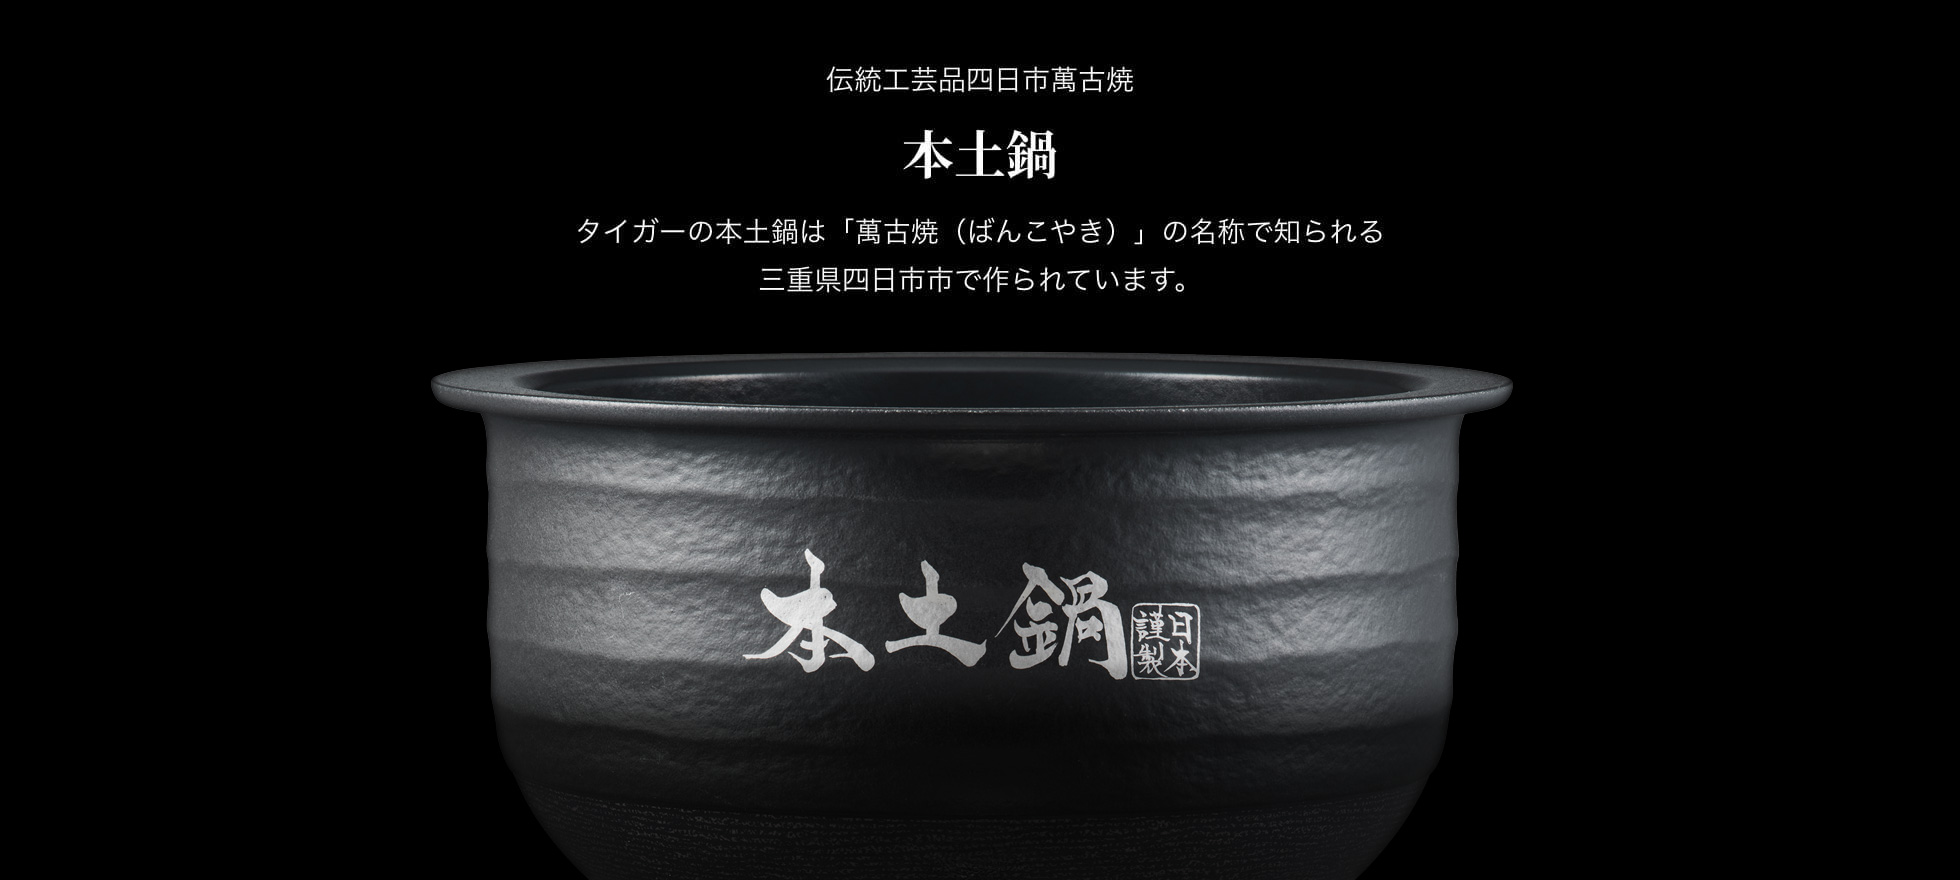 Yokkaichi Banko ware, a traditional craft. Authentic ceramic inner pot. Tiger’s authentic donabe is made in Yokkaichi City, Mie Prefecture known as the home of Banko ware.